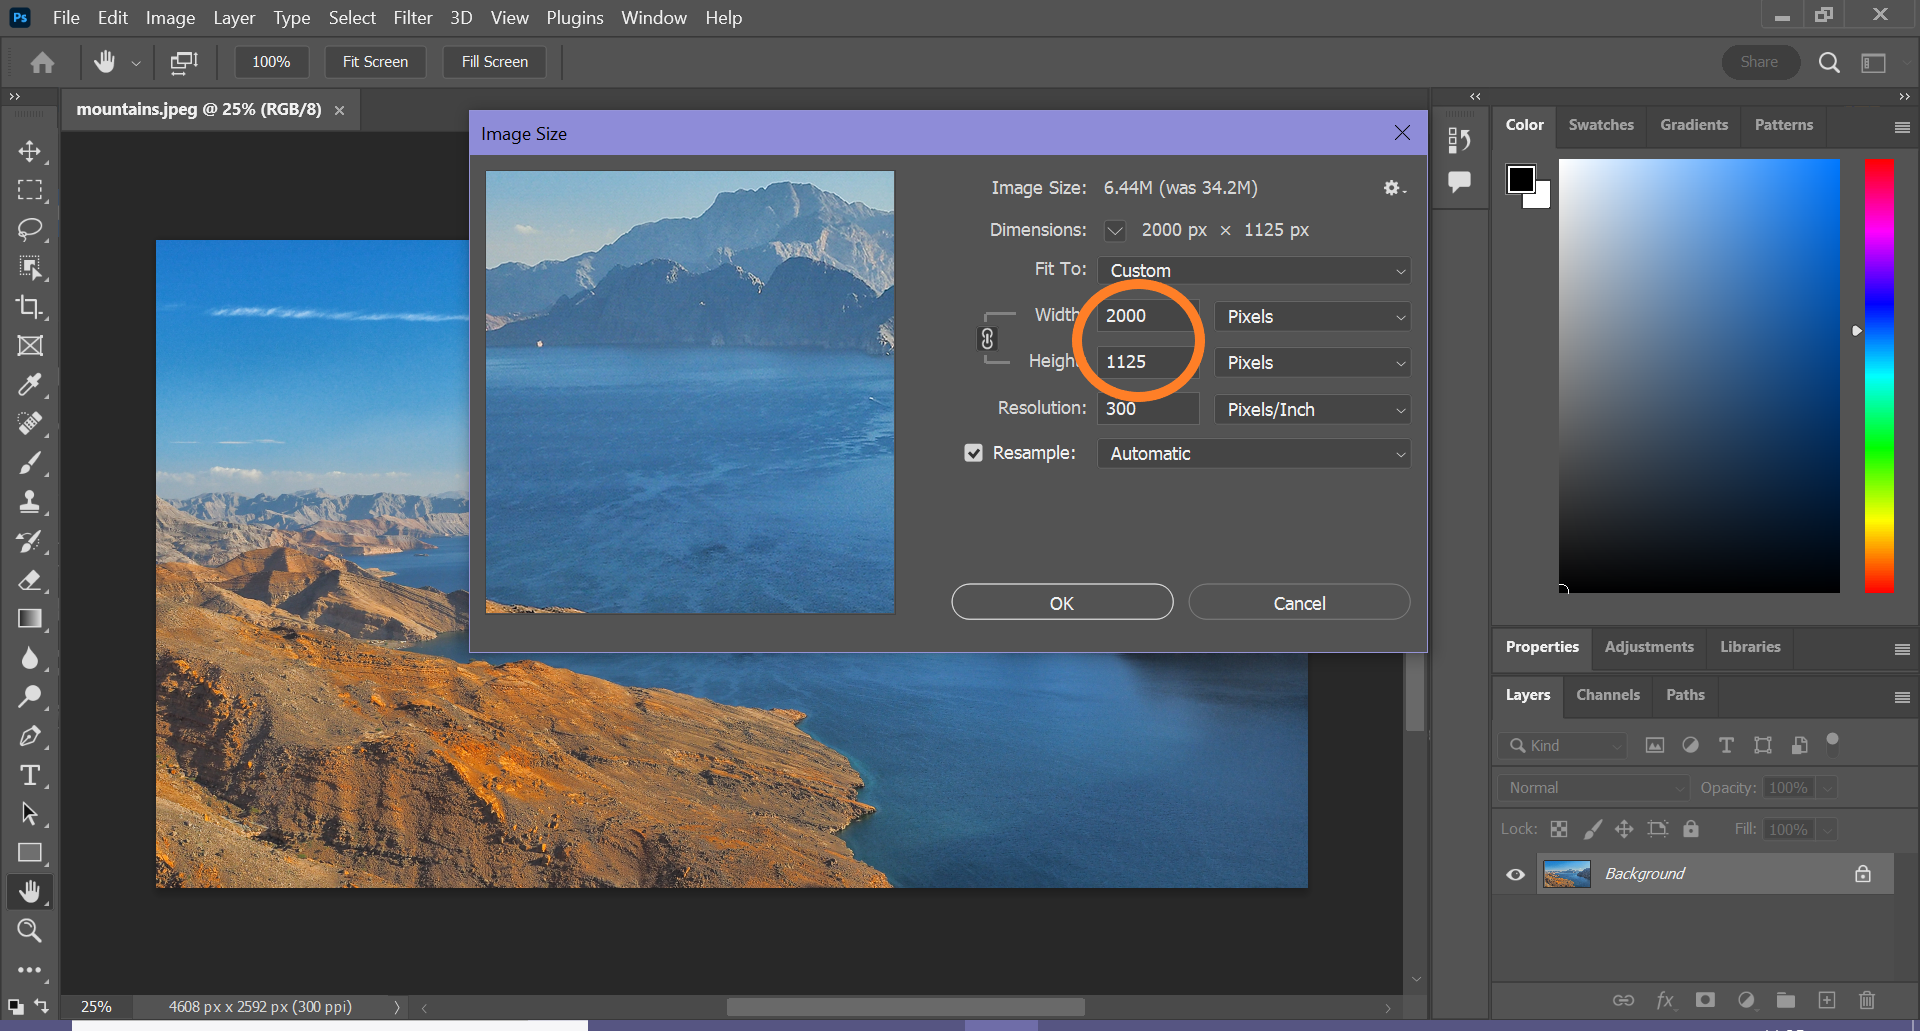 how to resize an image in photoshop